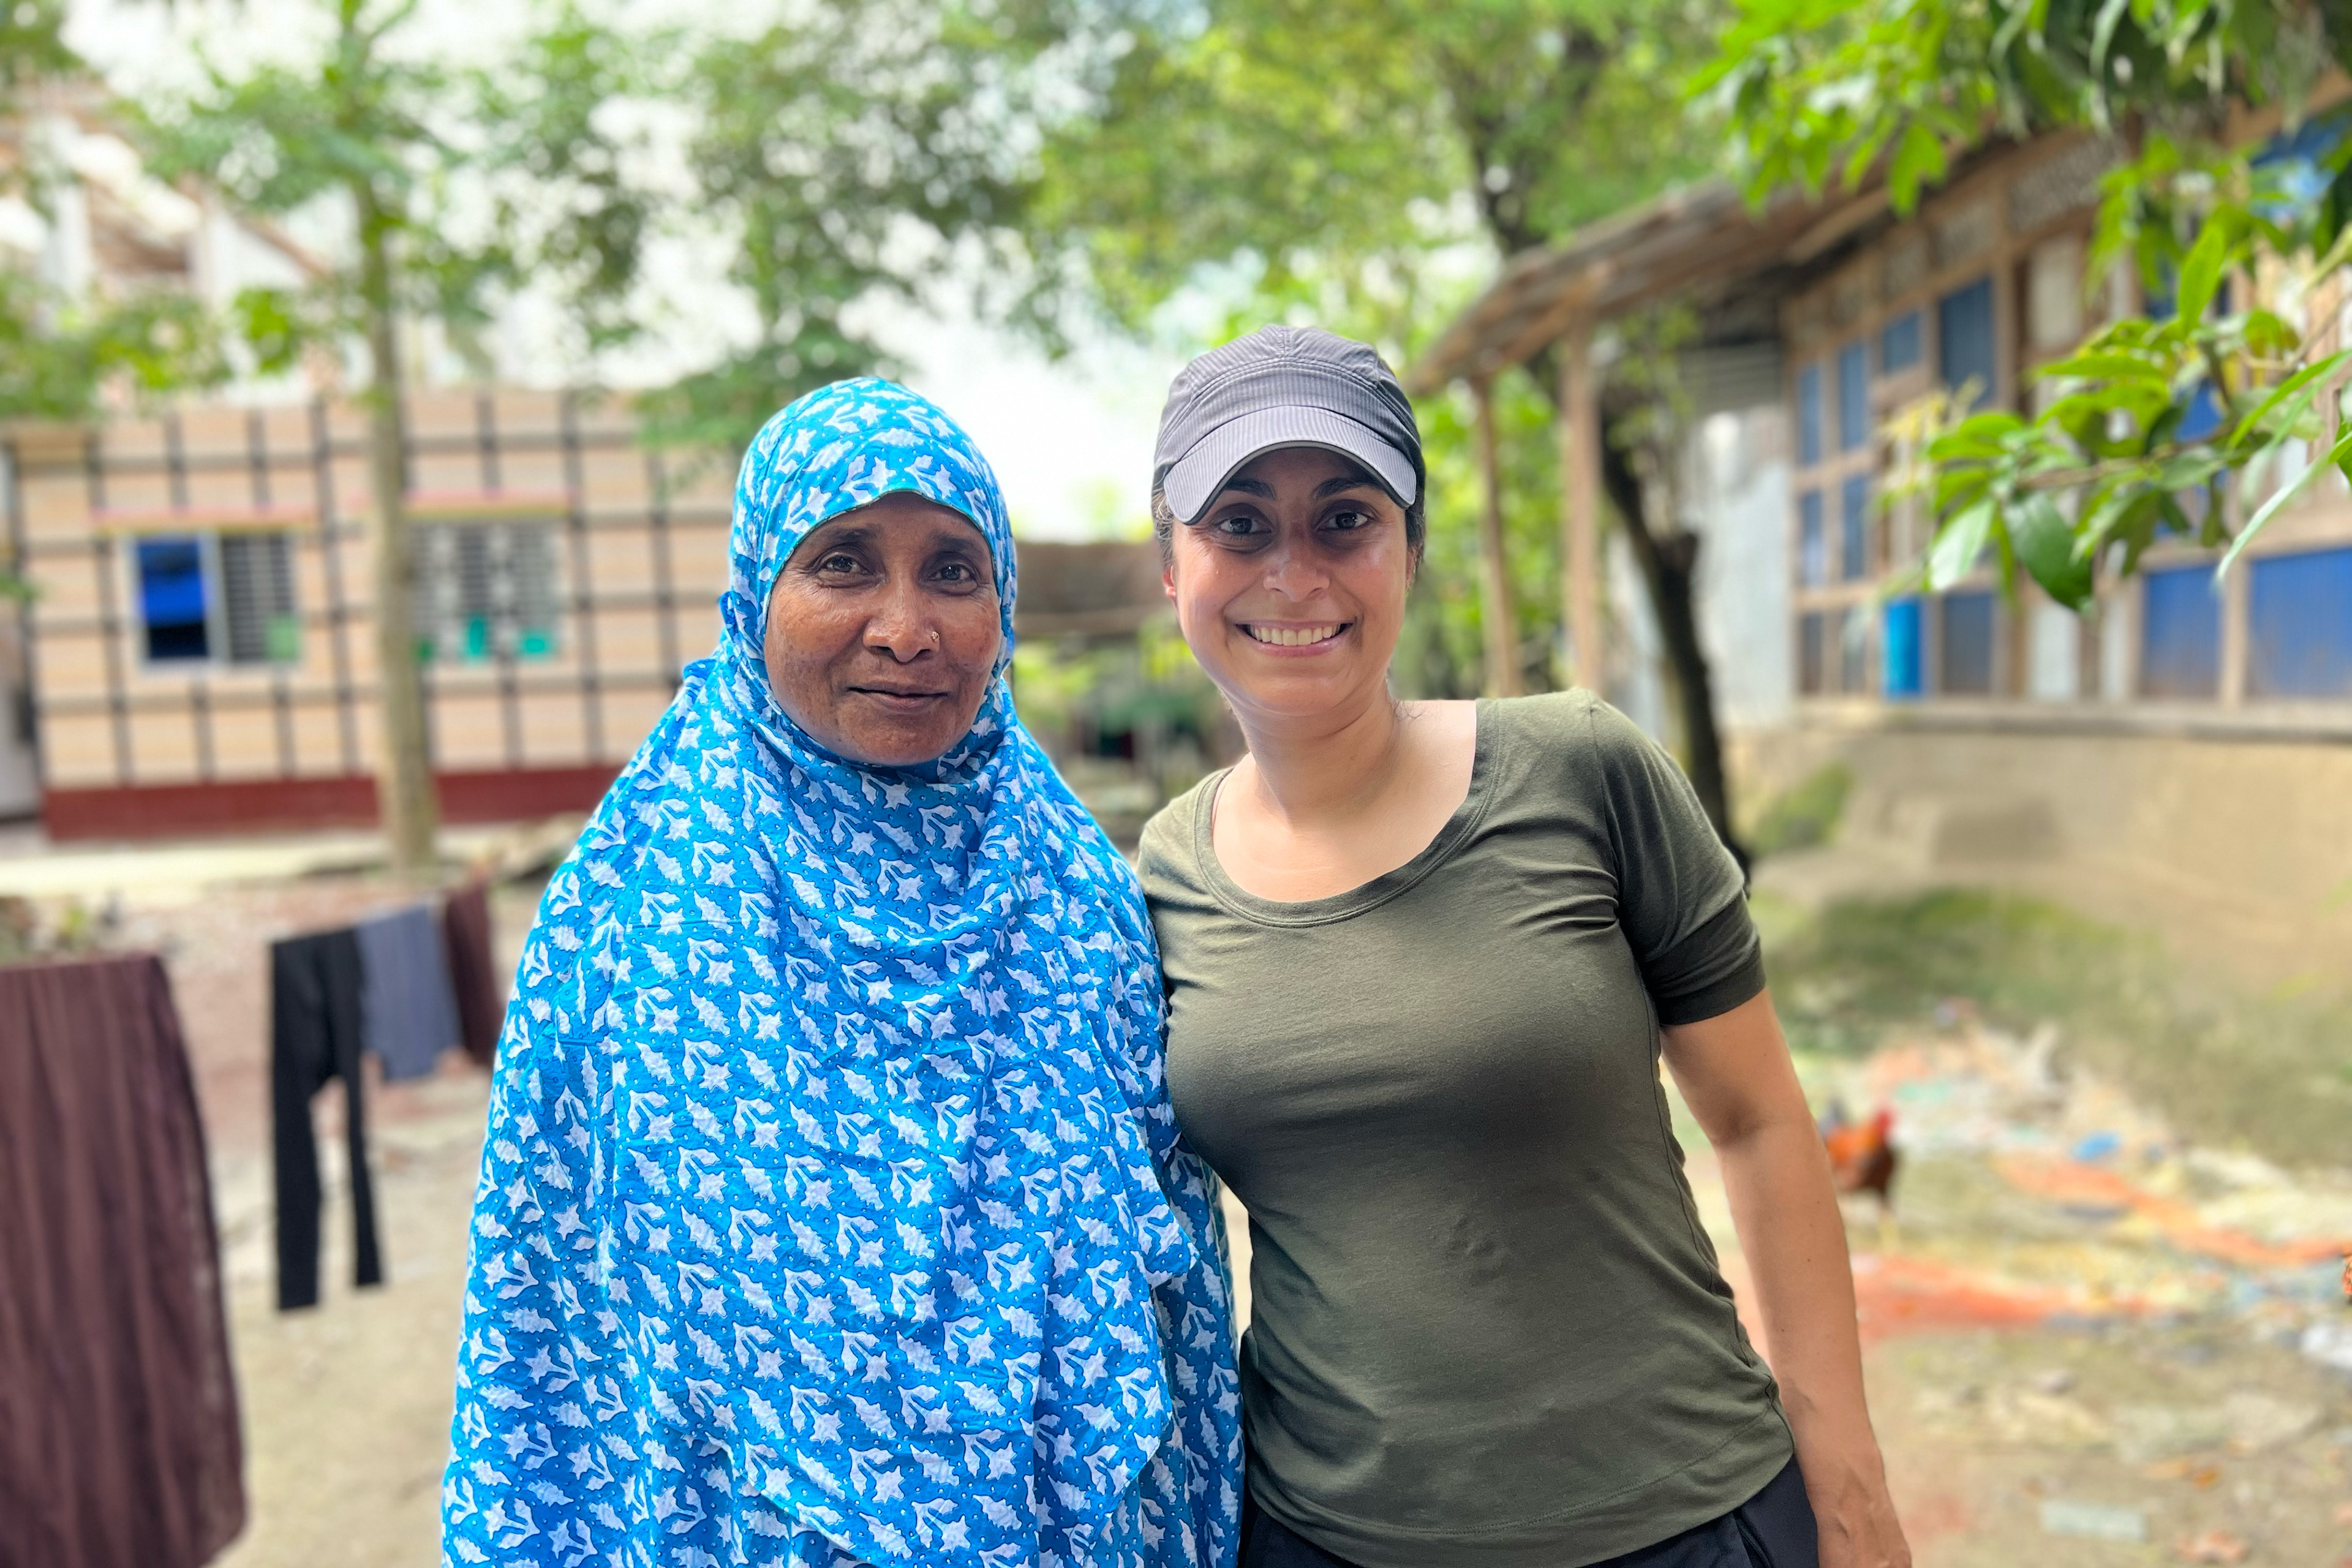 Rahima Banu (left) wears a blue scarf patterned with white flowers. It is draped over her head and body and tucked under her chin. She stands beside C茅line Gounder (right), who wears a black baseball cap and green T-shirt. They are in a small courtyard just outside Banu鈥檚 home. Laundry dries on a line in the background. Bright green, waxy leaves from growing trees provide shade and softened sunlight.